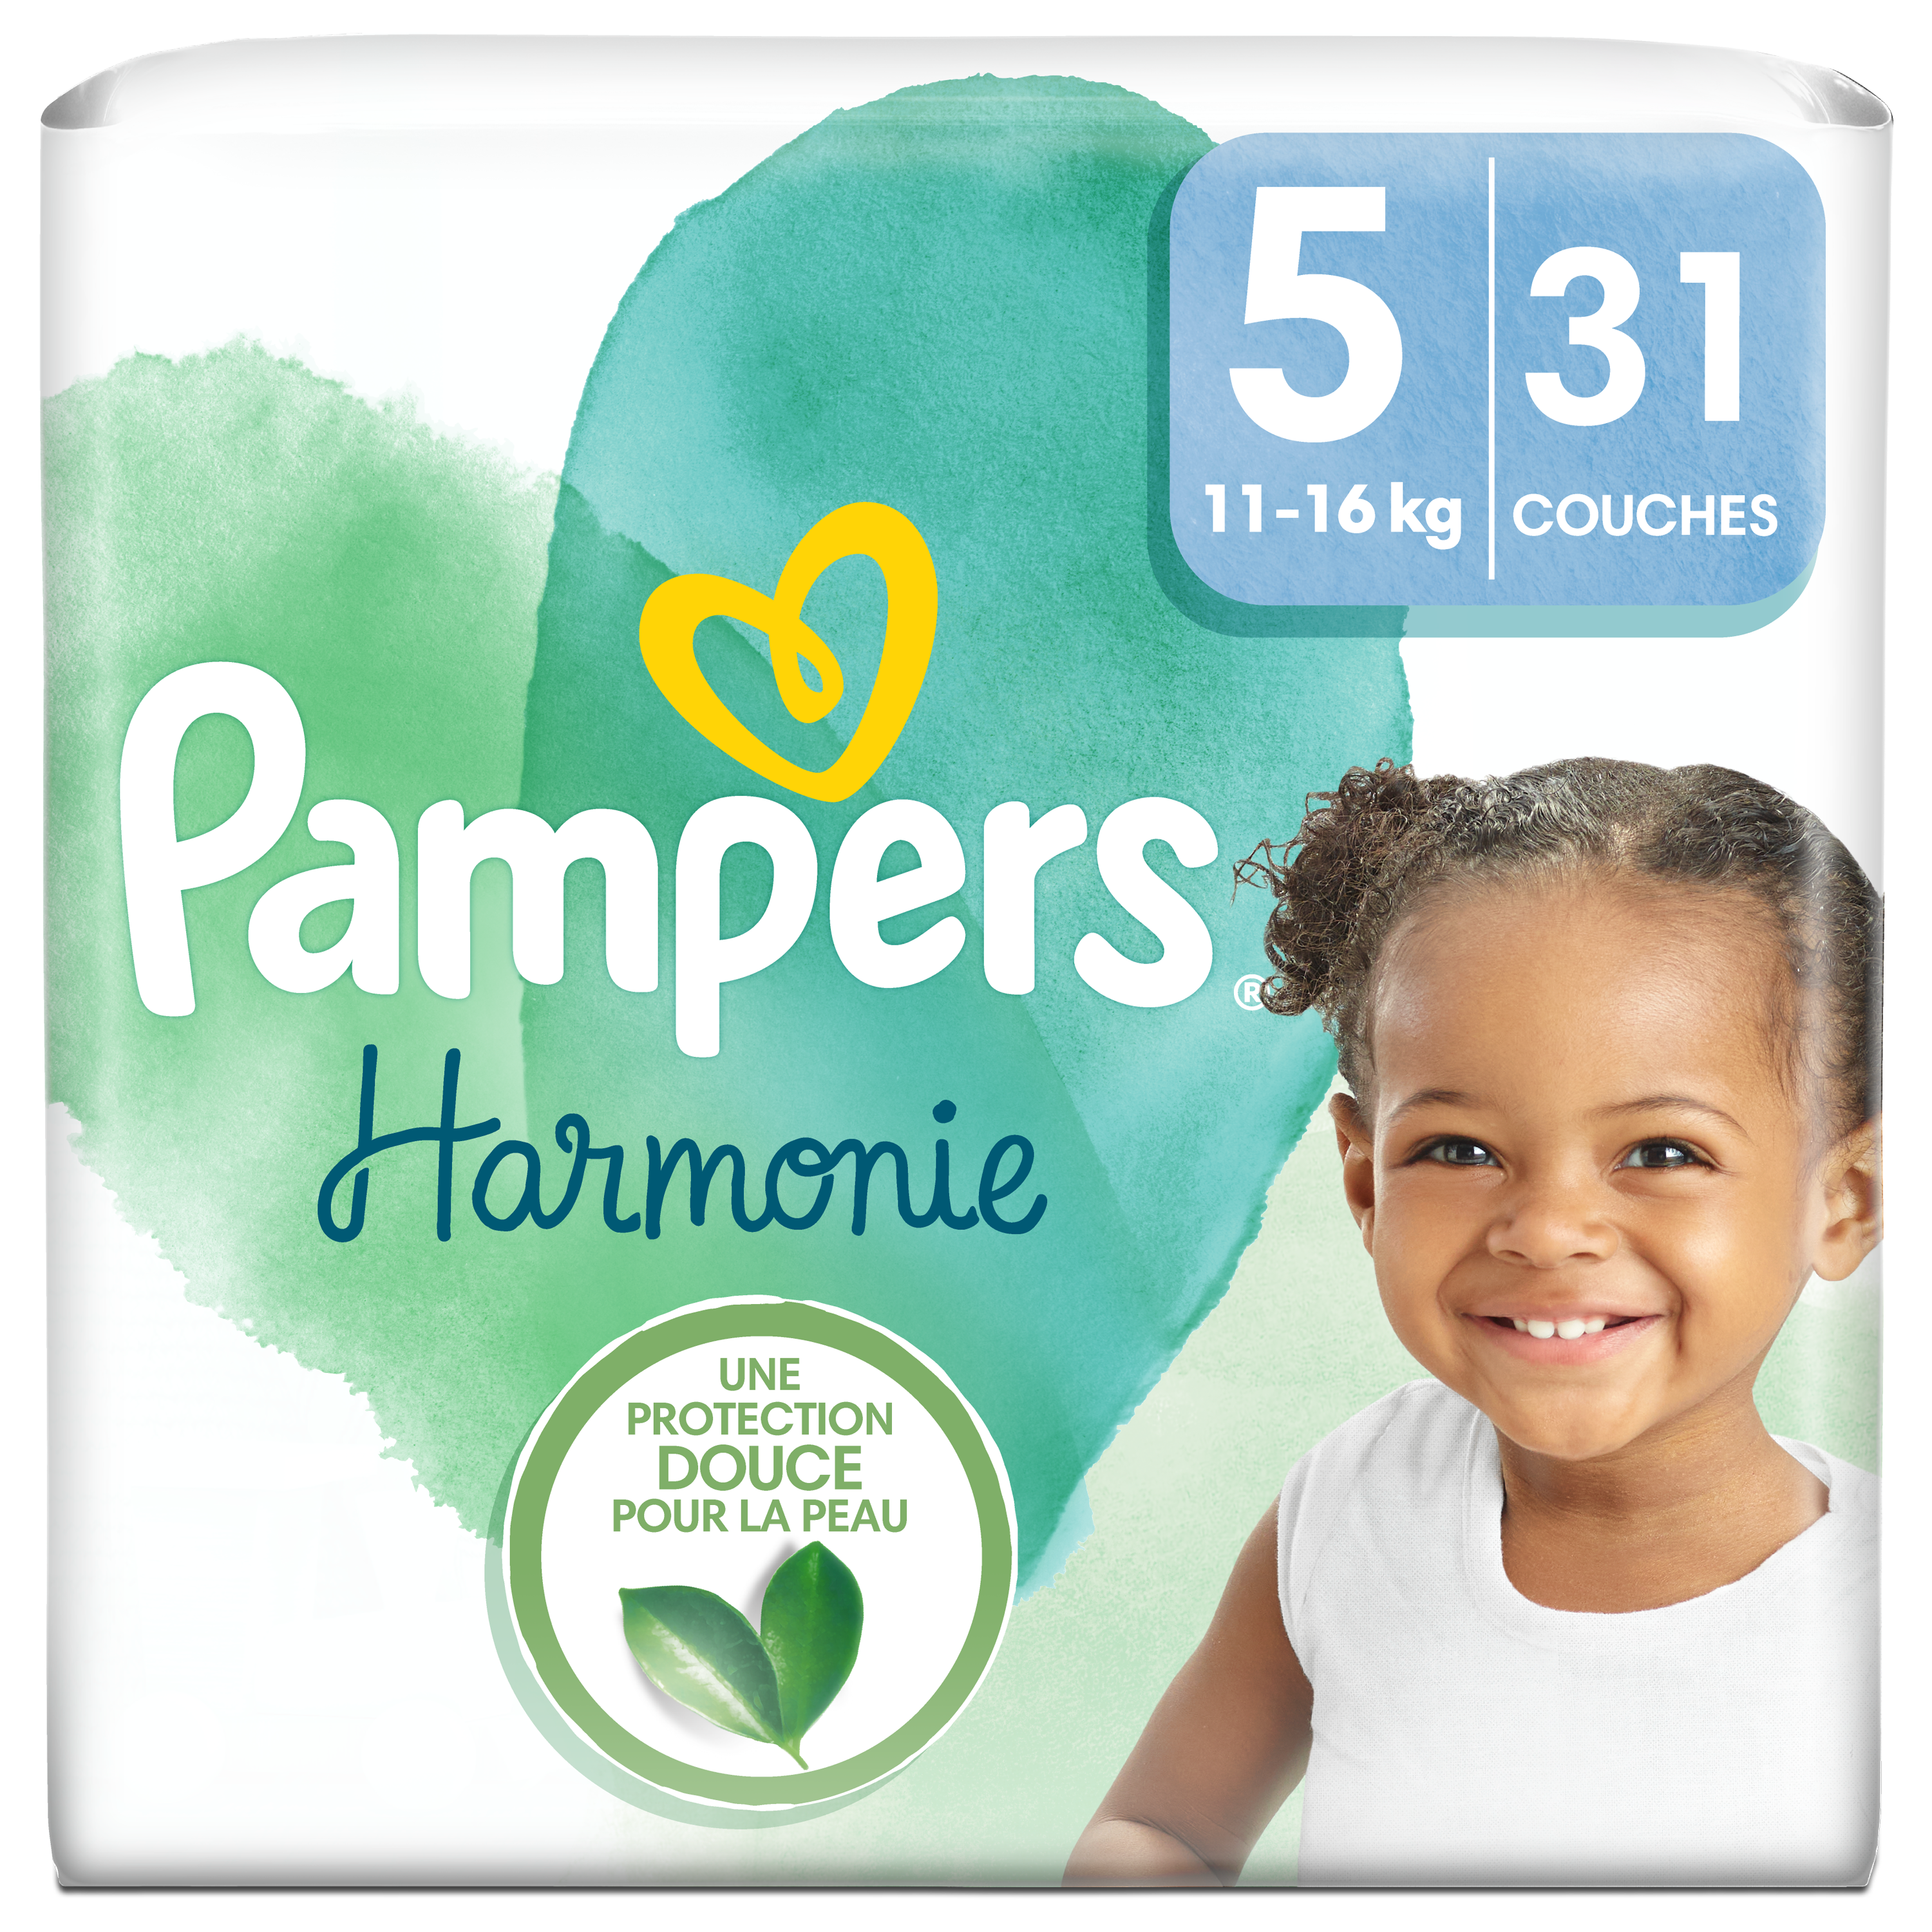 Pampers Harmonie Couches Taille 5, 31 Couches 11kg -16kg au